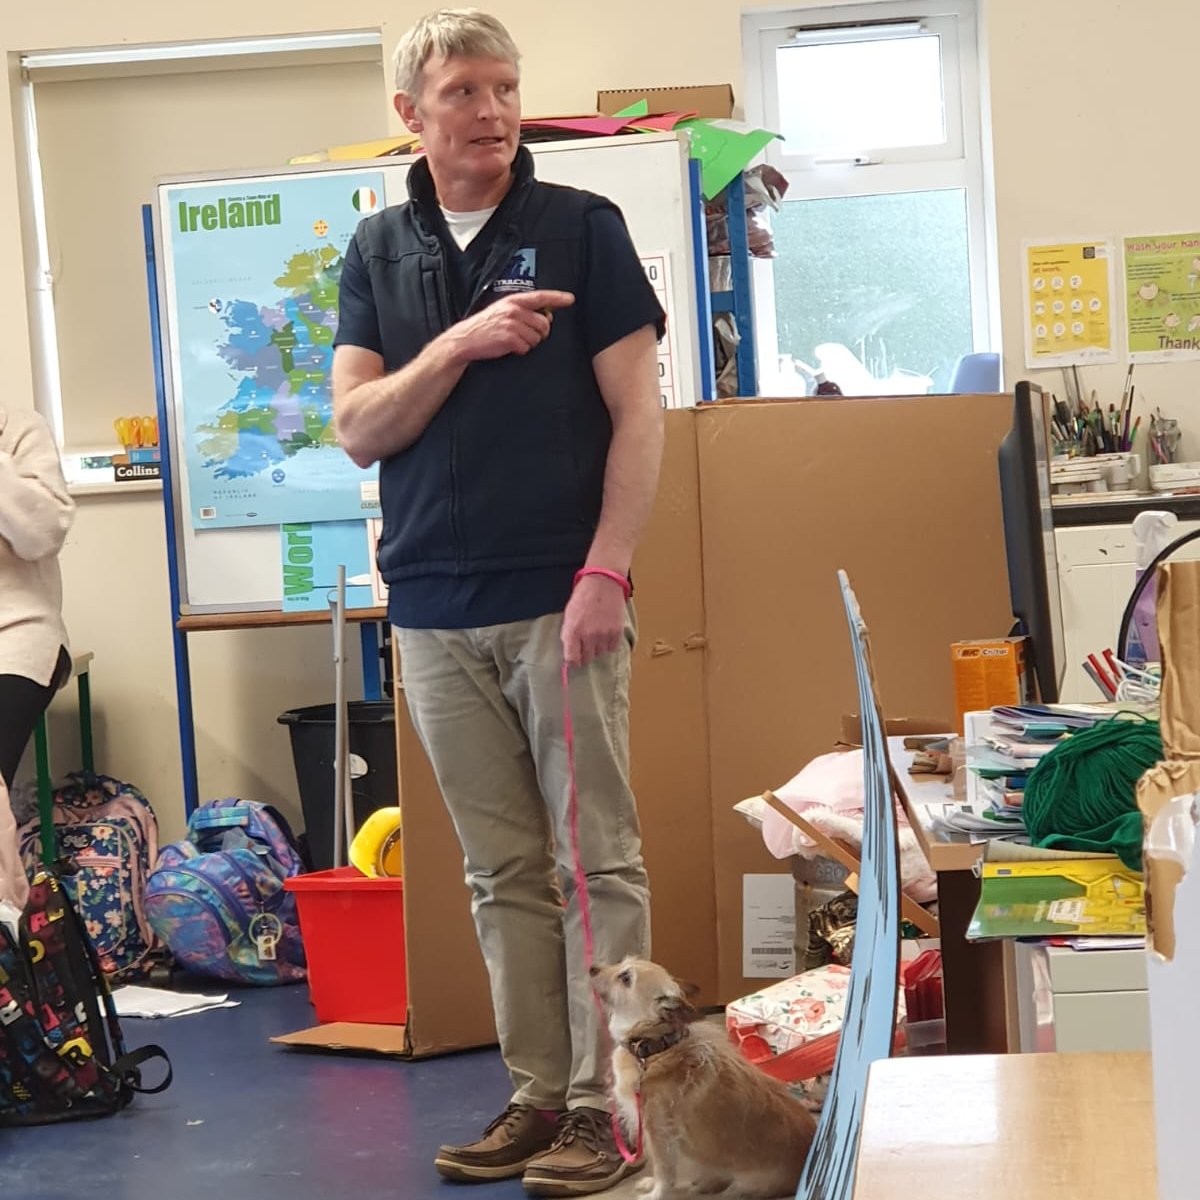 A big thank you to Sean Coffey @mulcairvets (and Peggy the dog!) for visiting yesterday to give a Talk. He also invited everyone to their new practice Open Day on 6th January. Sounds like fun!